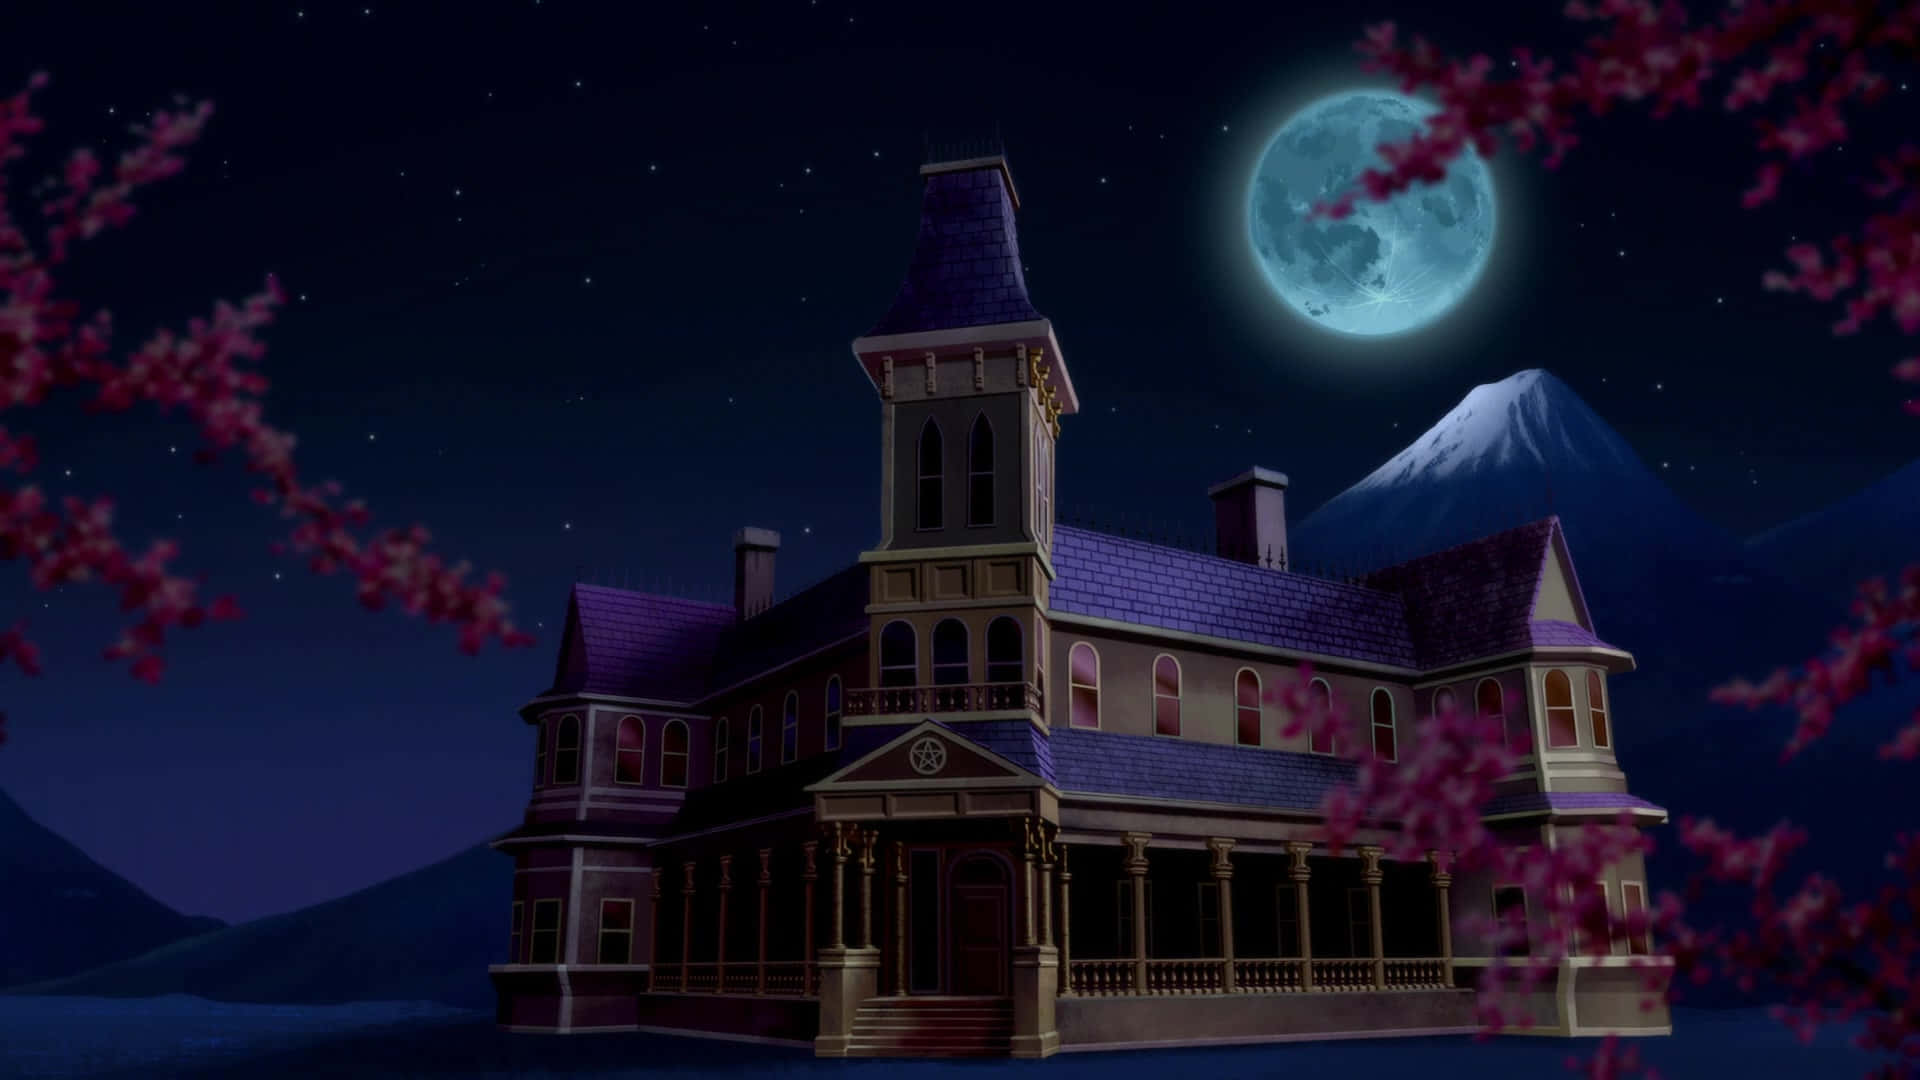 A House With A Full Moon In The Background